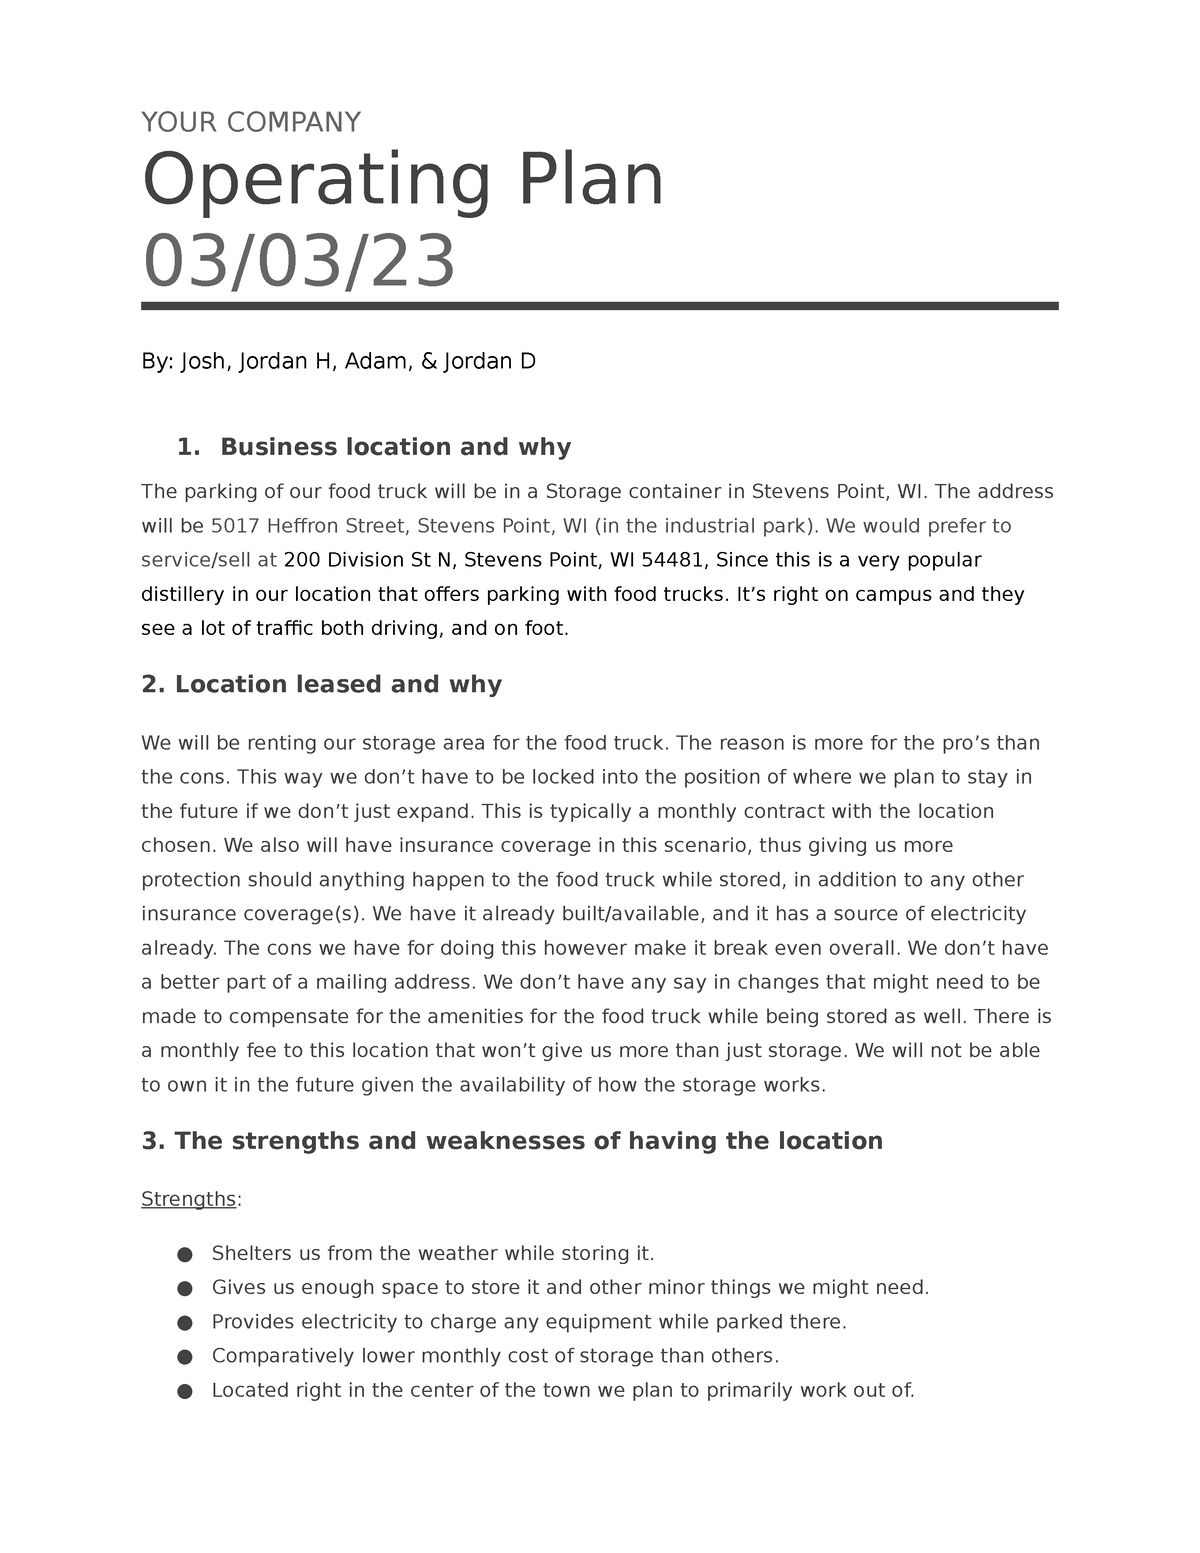 operating-plan-part-of-a-business-plan-your-company-operating-plan